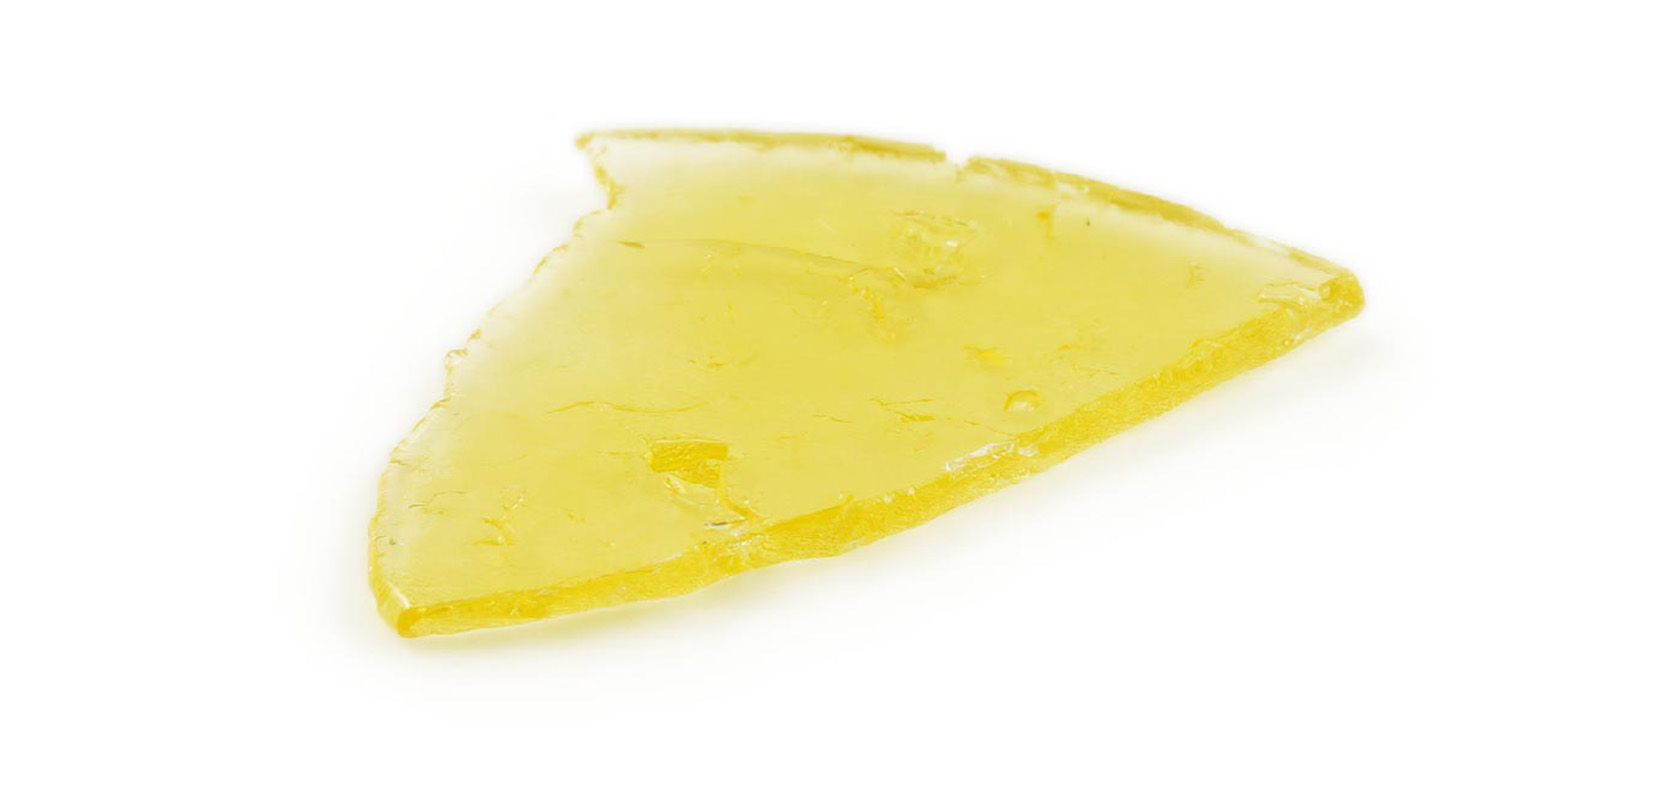 Alaskan Thunder Fuck shatter weed for dabbing. Buy cannabis concentrates at Low Price Bud weed dispensary for dispensary weed. buy weed online.